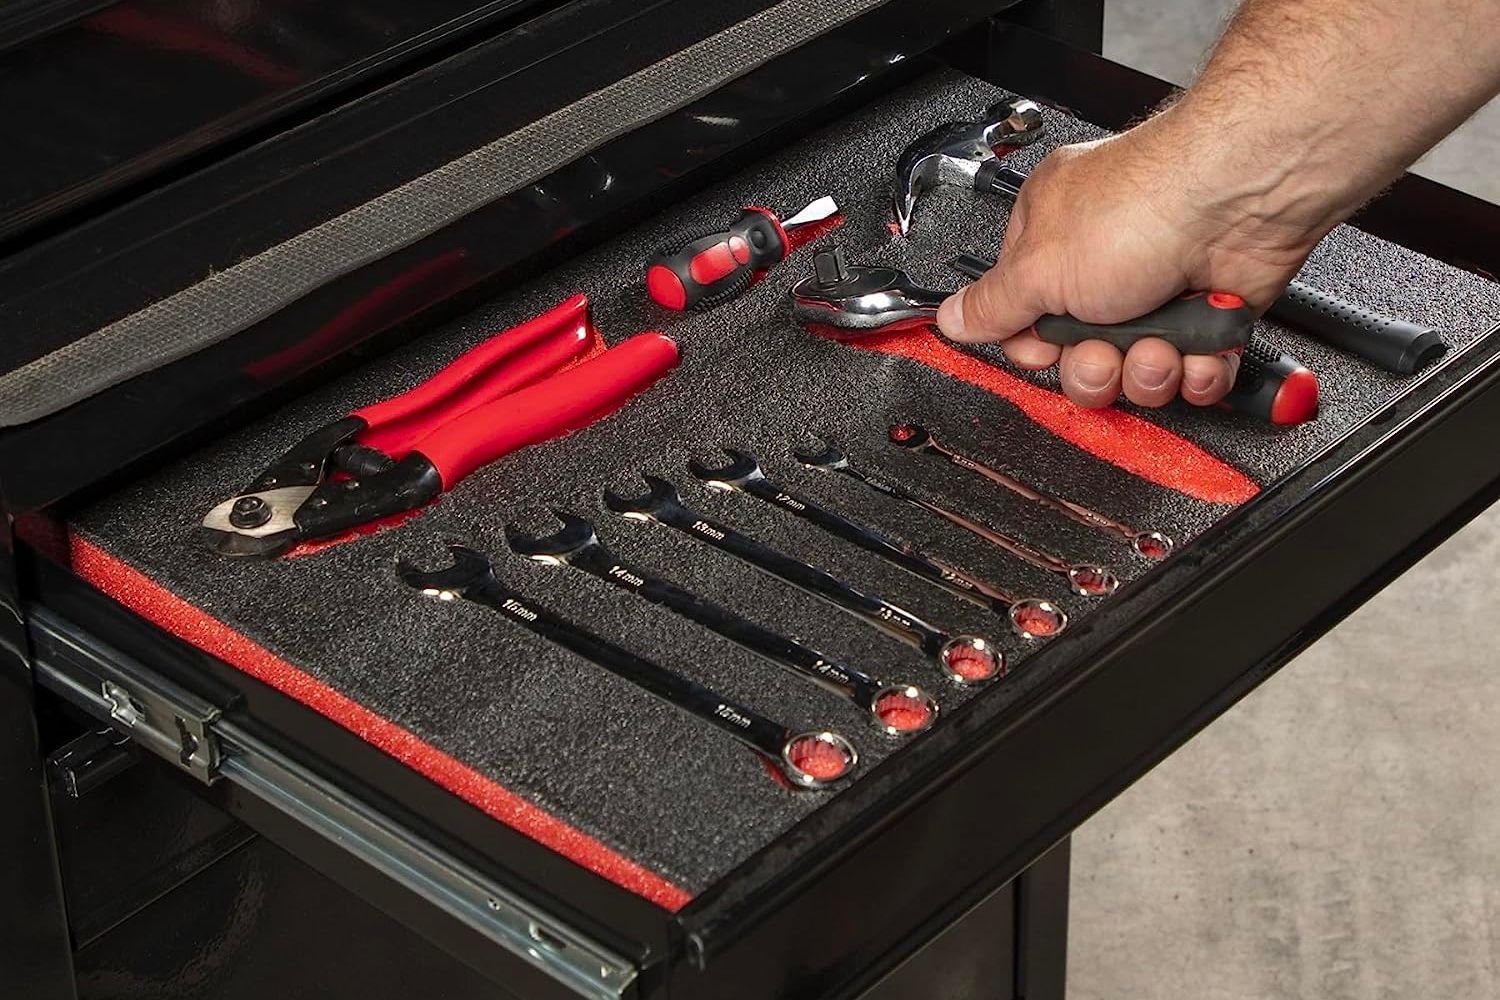 A person removing a tool from the best tool box organizer option